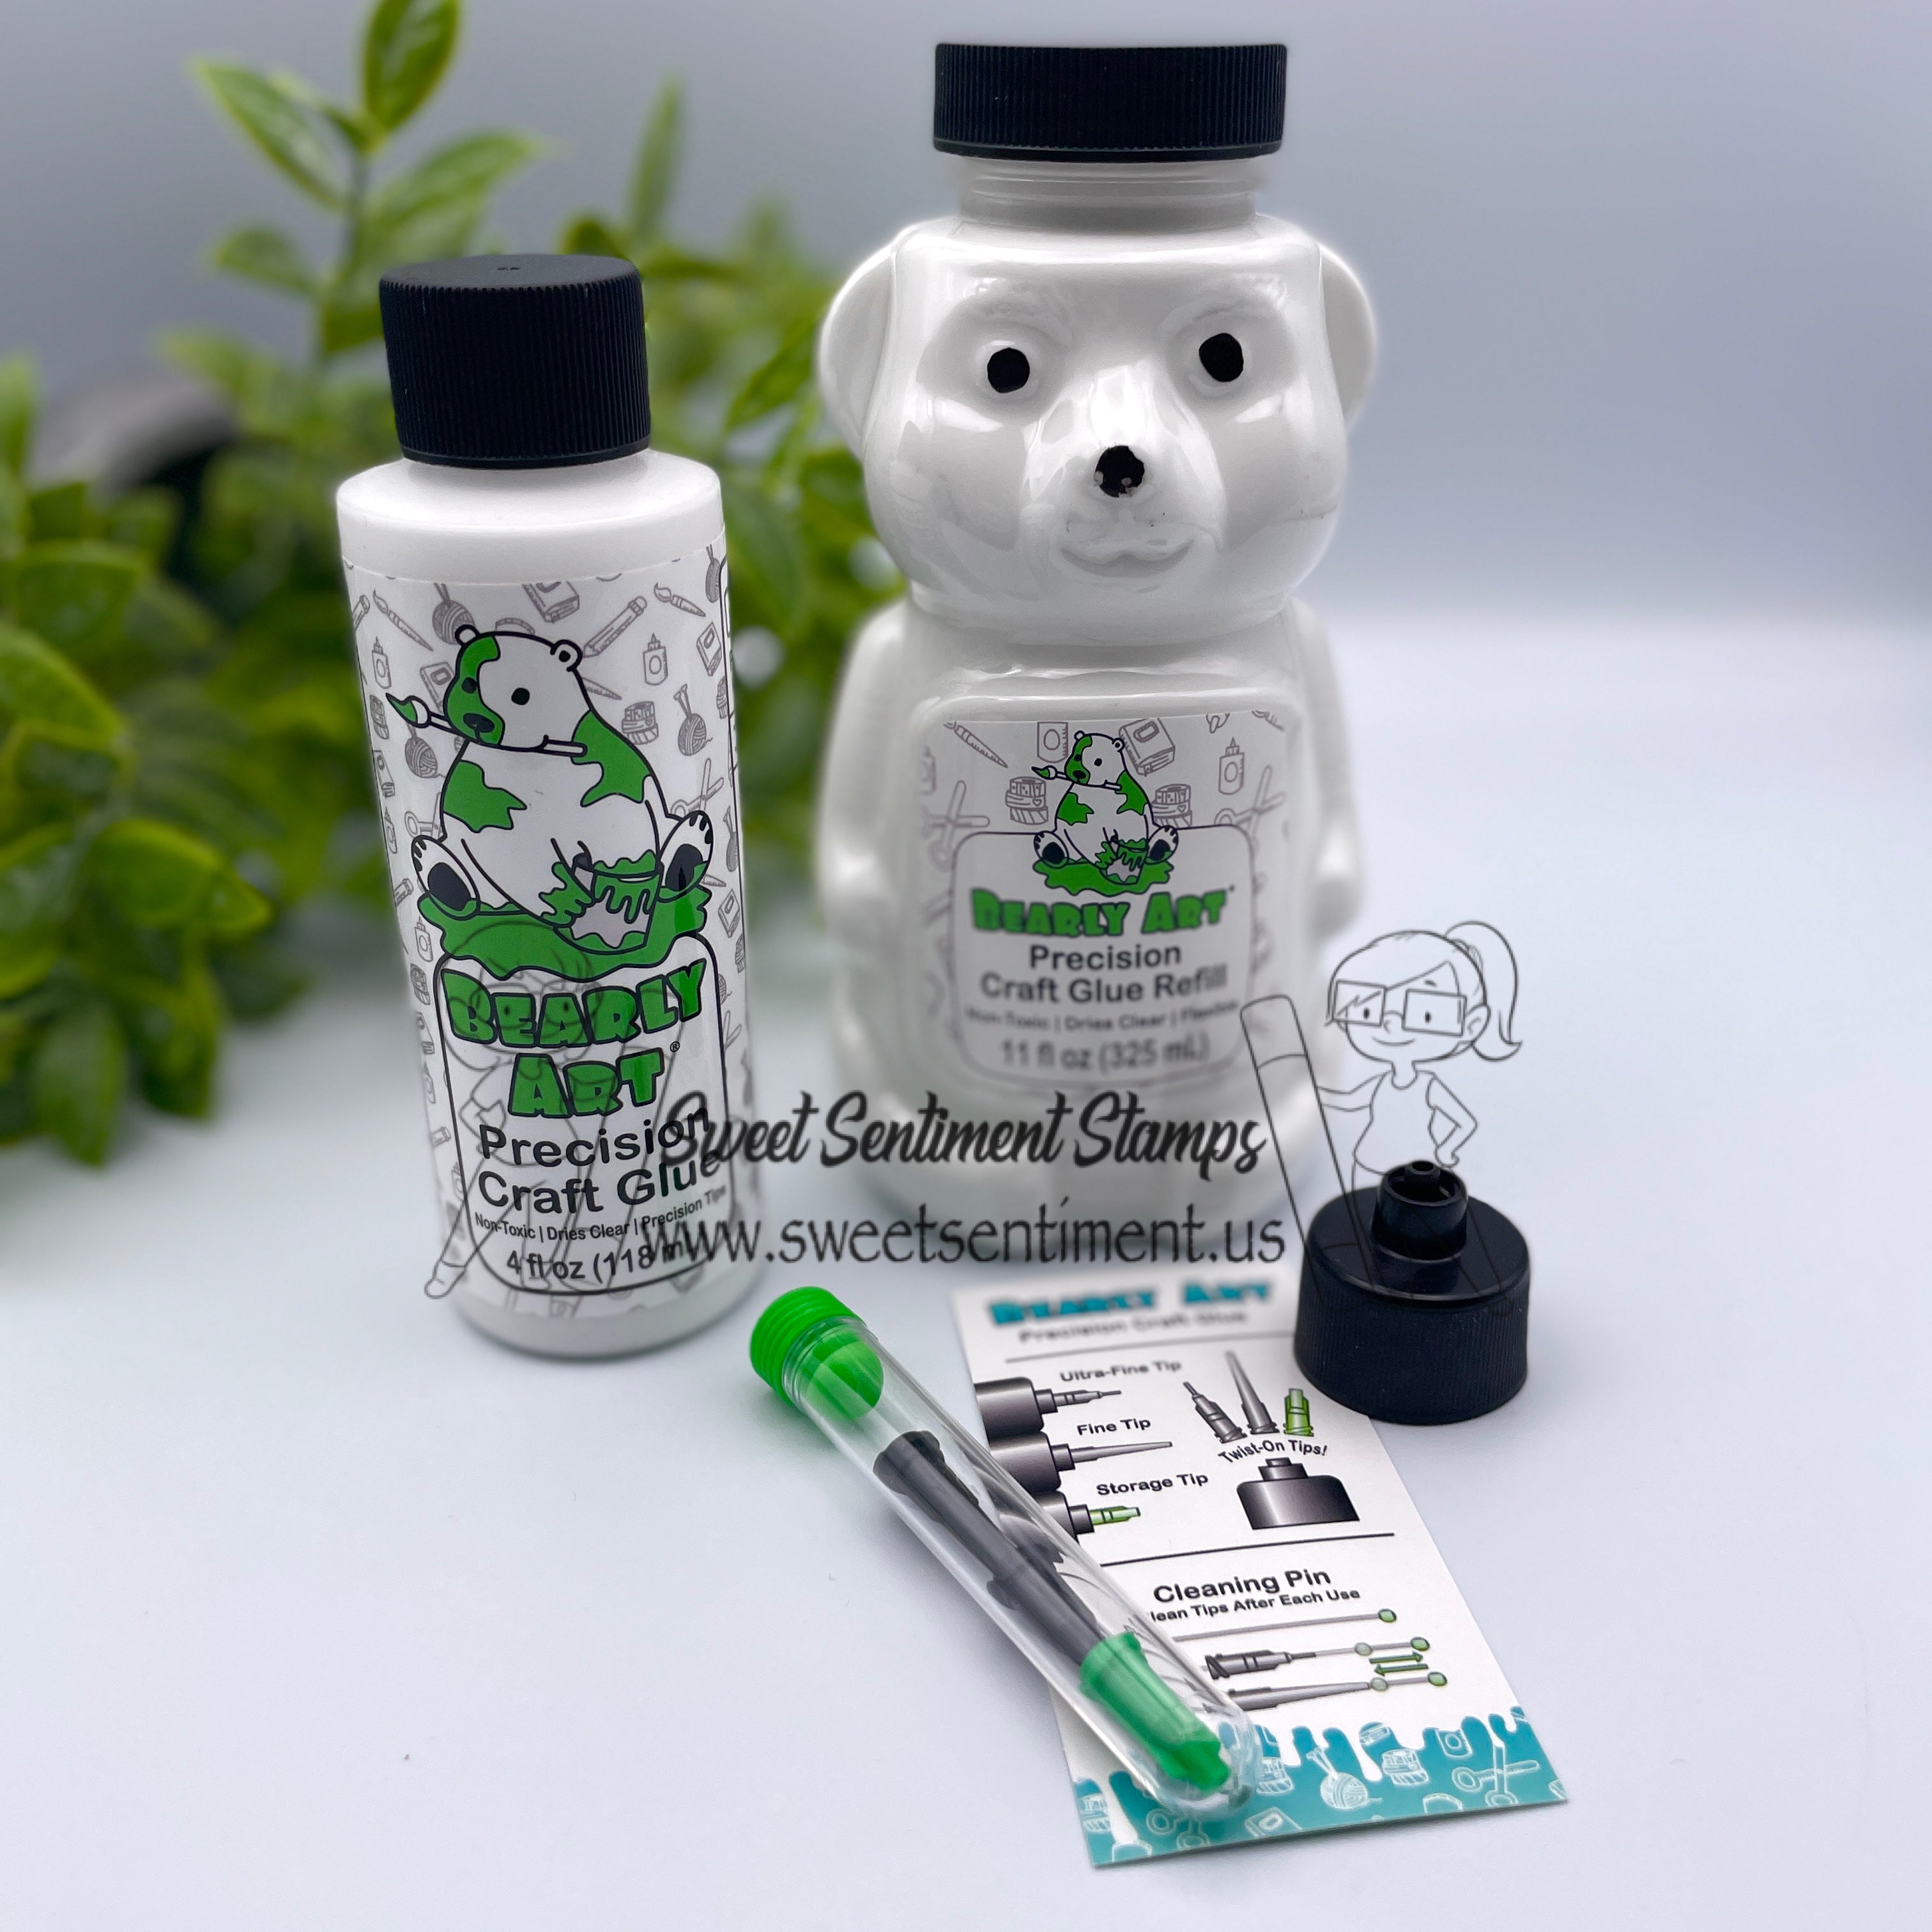 Bearly Art - Bring you ideas to life! 🙌😊 • Start crafting, creating and  inspiring! 🥳 • Bearly Art Precision Craft Glue is here to help😊 • • • •  #Craft #Crafting #